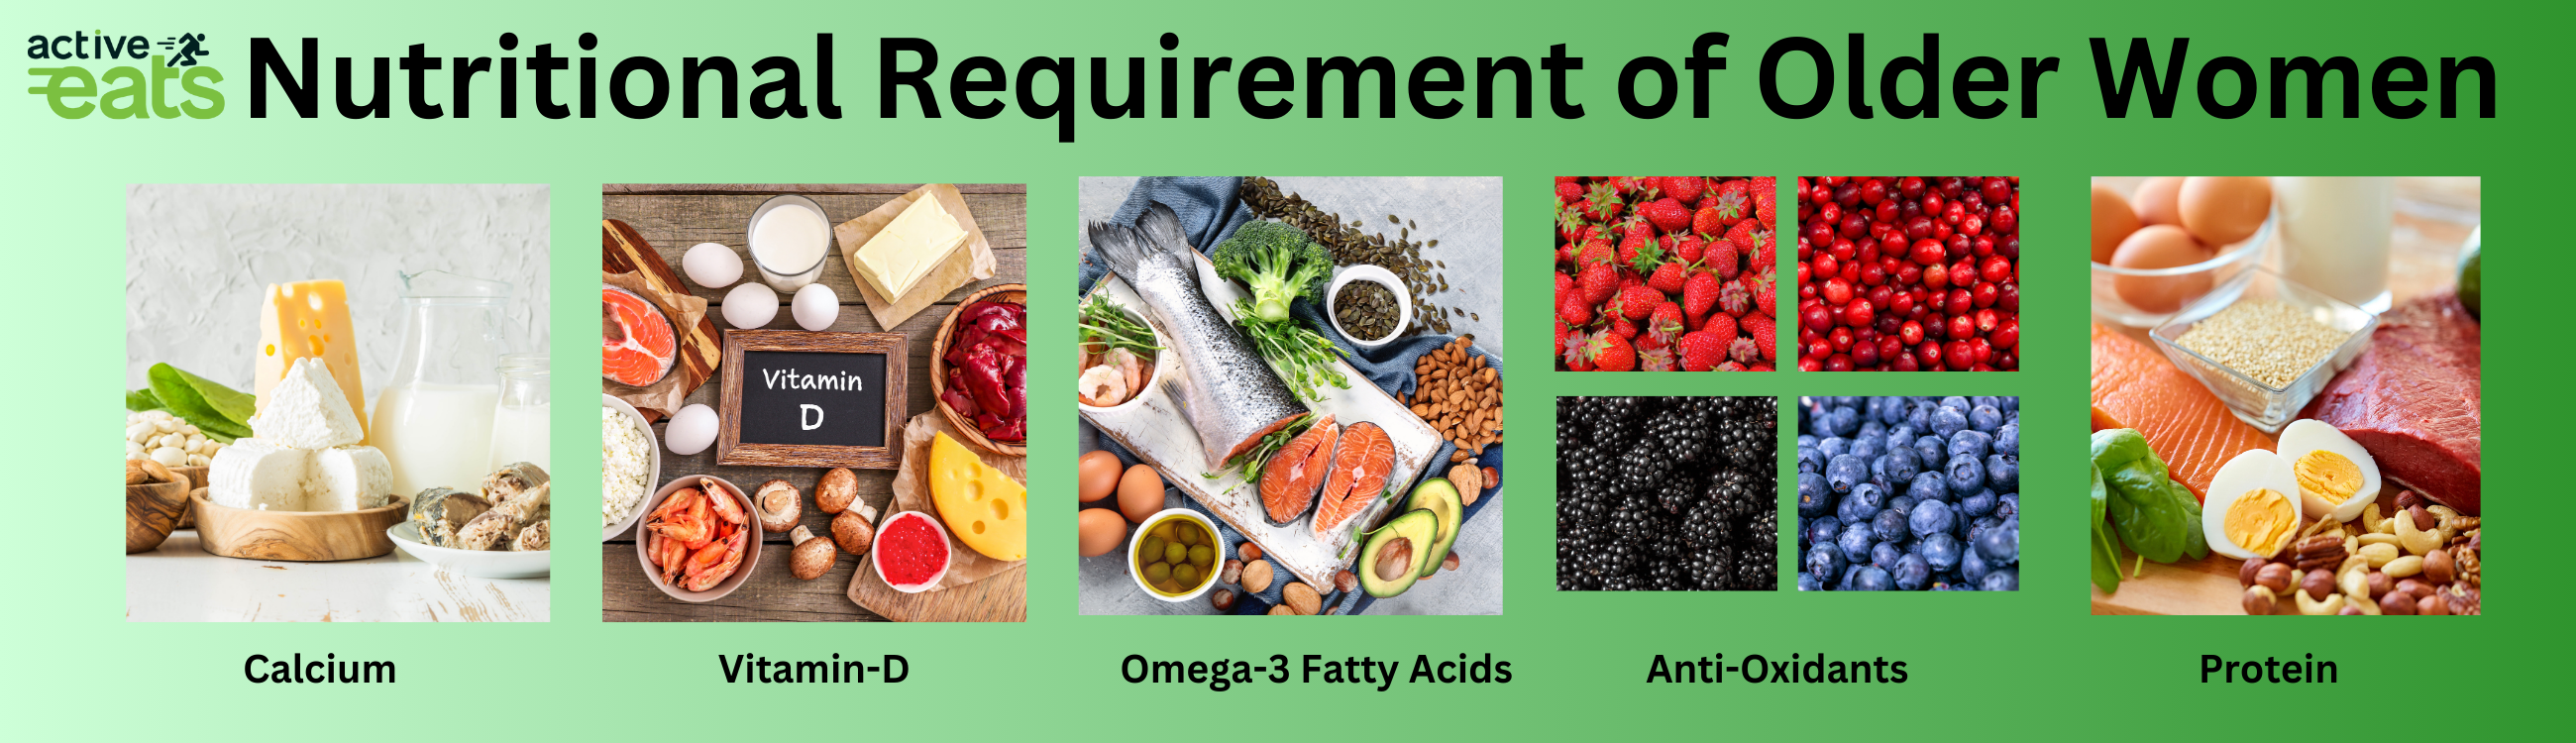 Image shows nutritional requirement for older women. It includes: 1. calcium rich food sources, 2. Vitamin D rich food items 3. Omage-3 fatty acids. 4. Anti-Oxidants rich berries 5. Protein rich food items like egg, fish and nuts